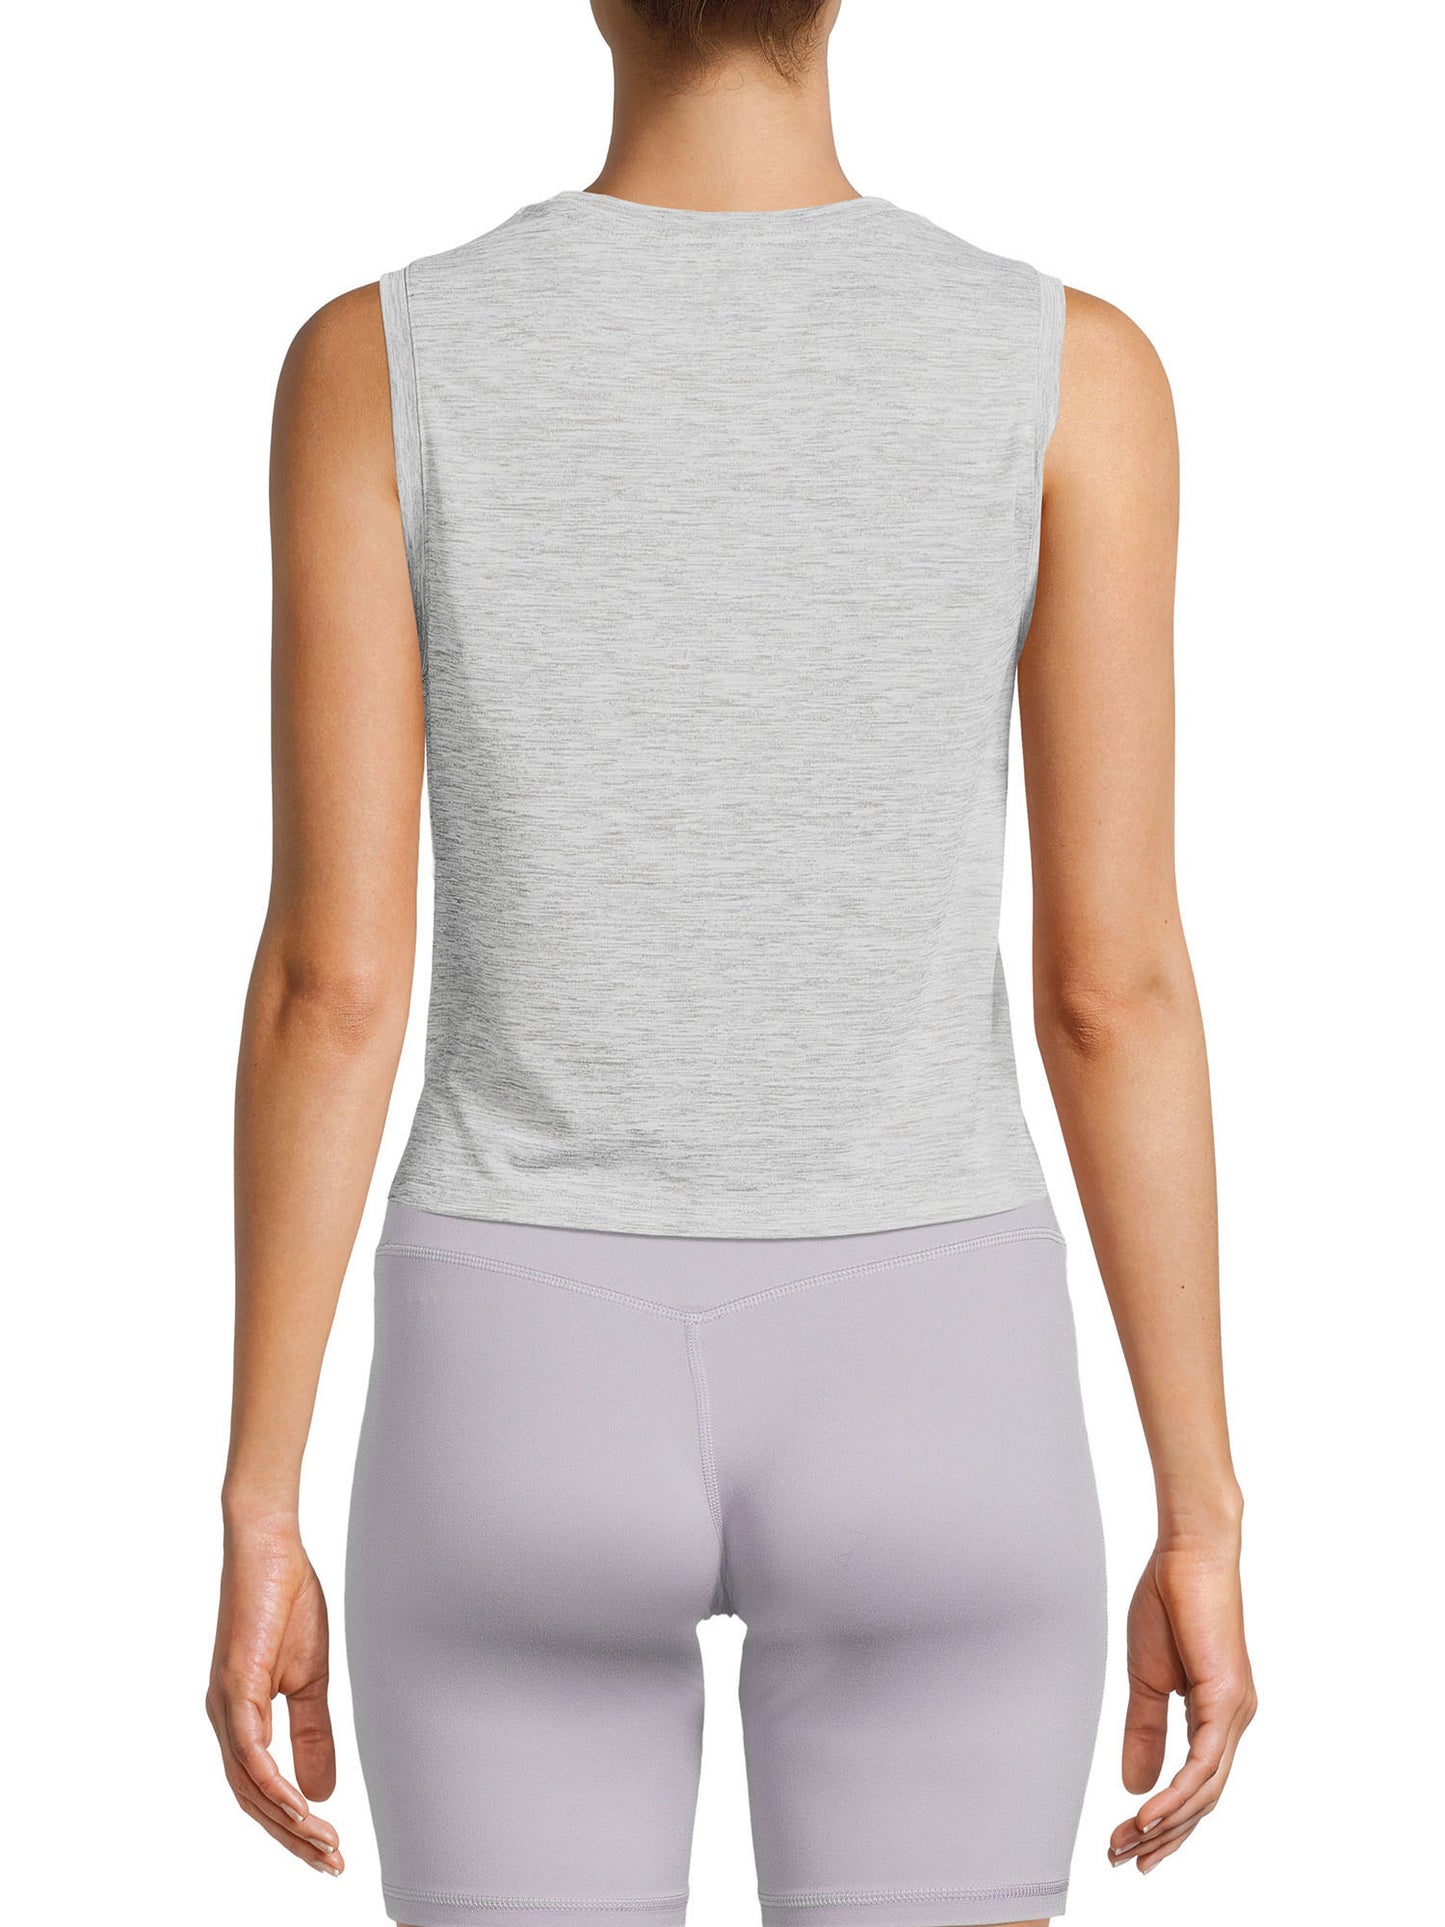 Athlux Womens Active Side-Twist Tank